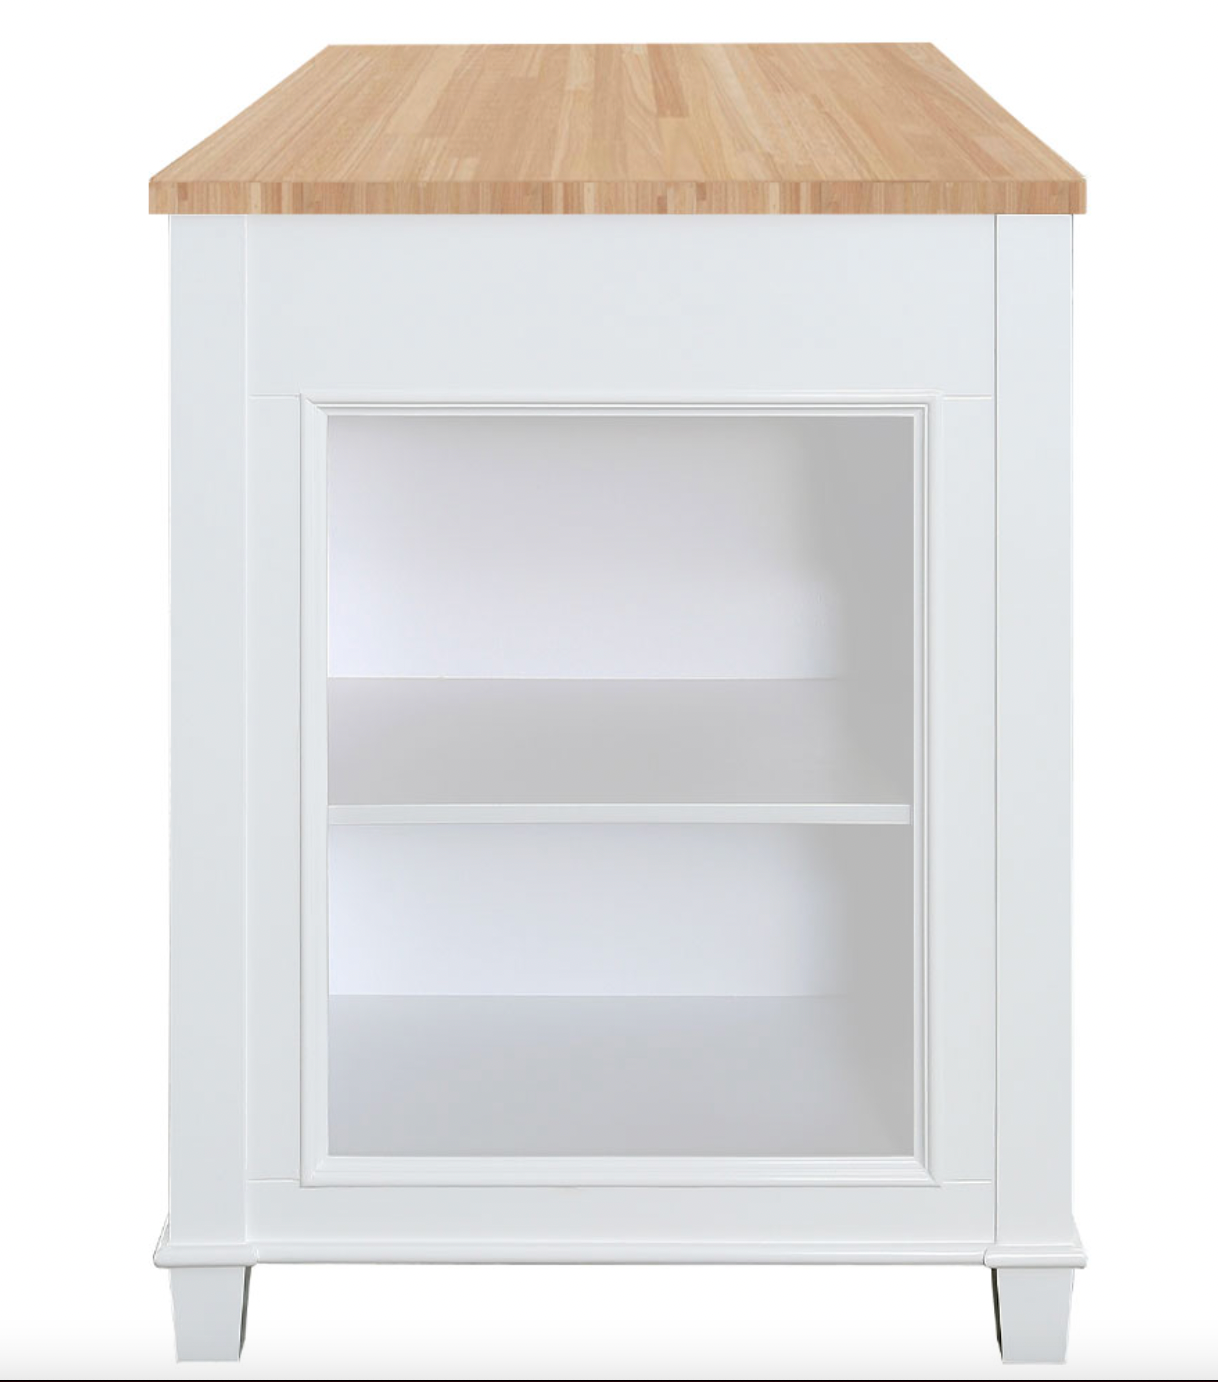 Medley 54 In. Kitchen Island With Slide Out Table - White